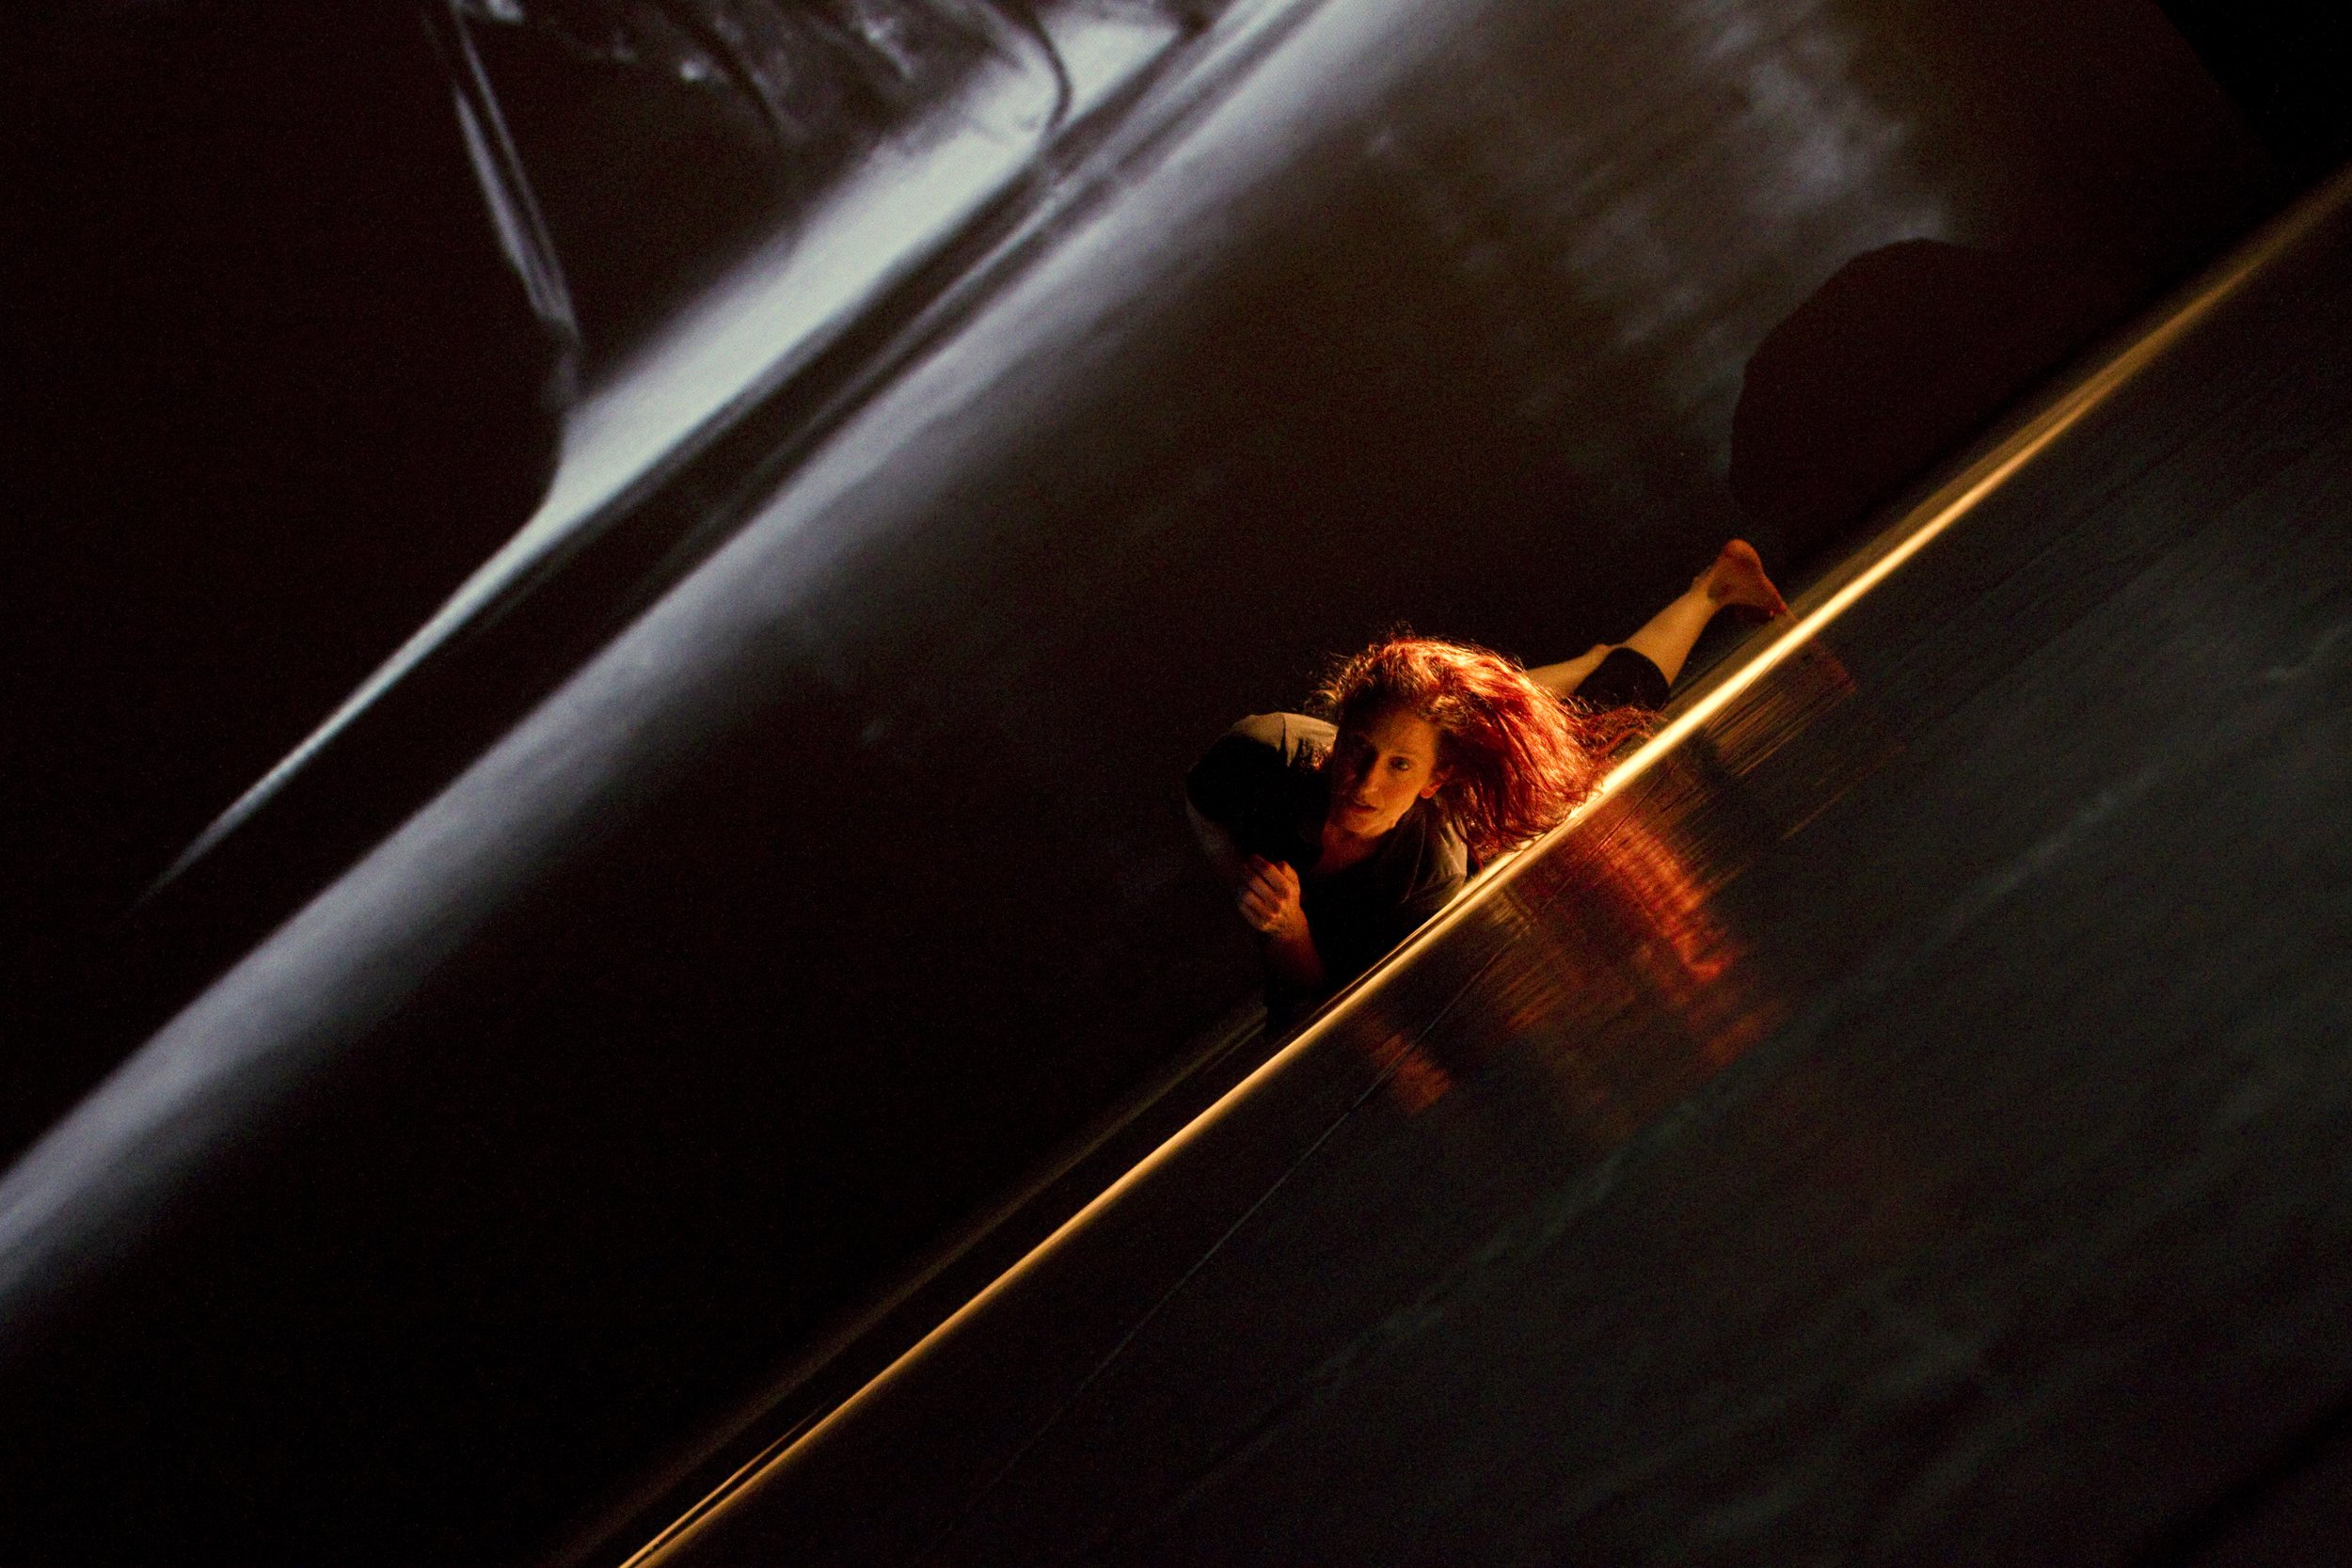 A dancer rolls on the stage in a sliver of light.